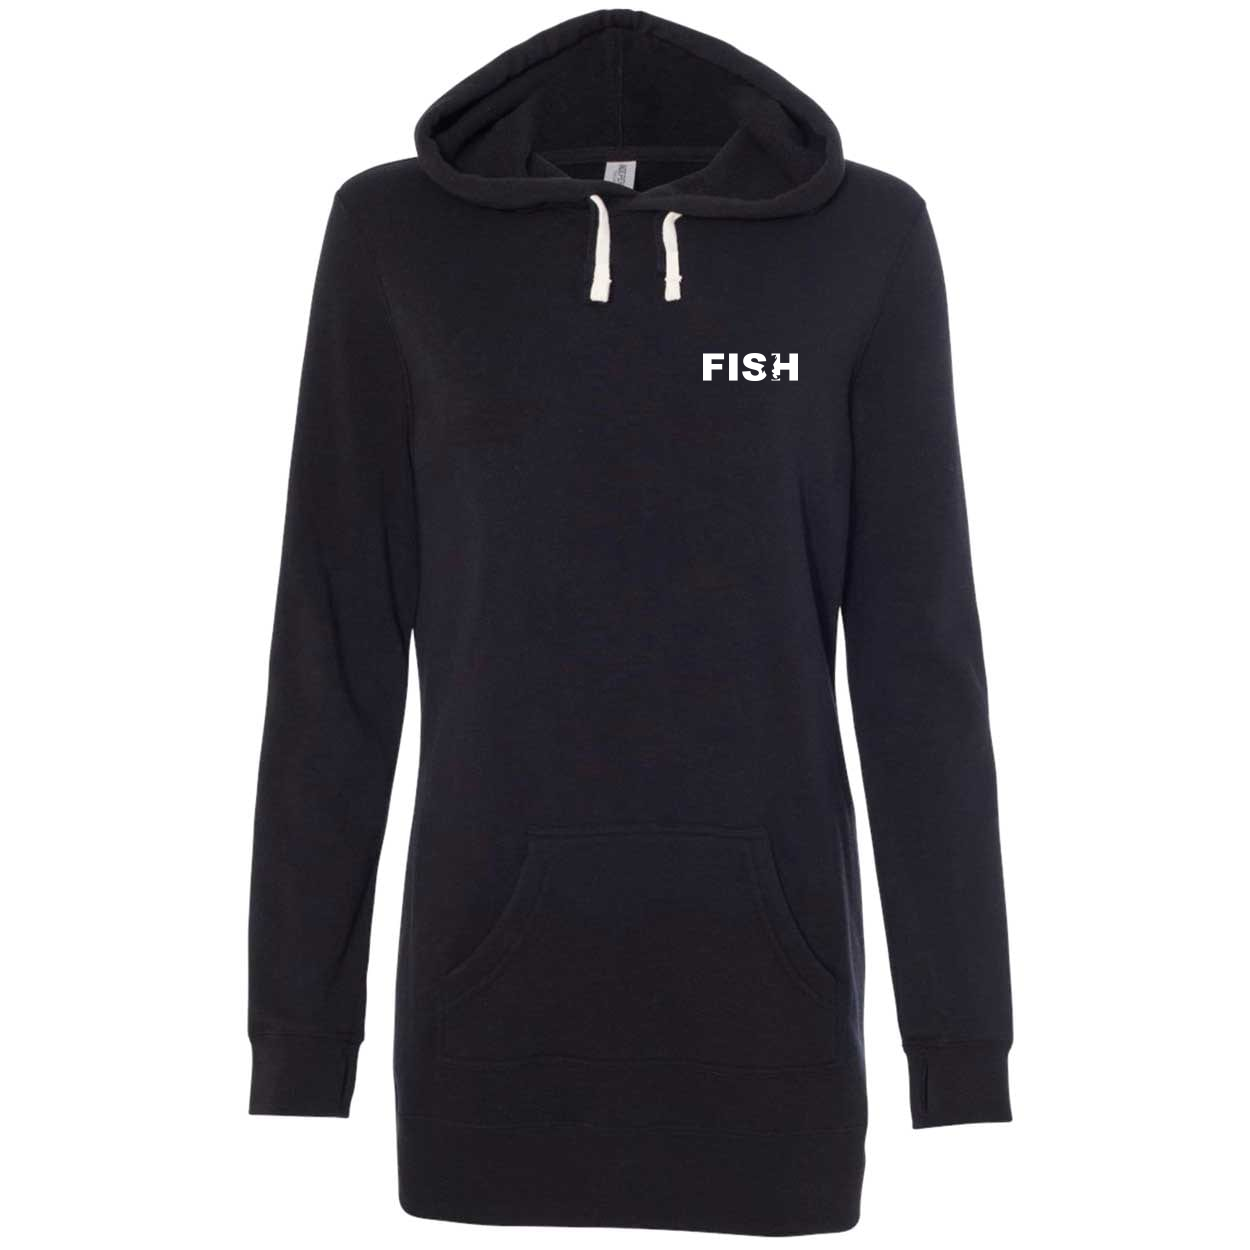 Fish Catch Logo Night Out Womens Pullover Hooded Sweatshirt Dress Black